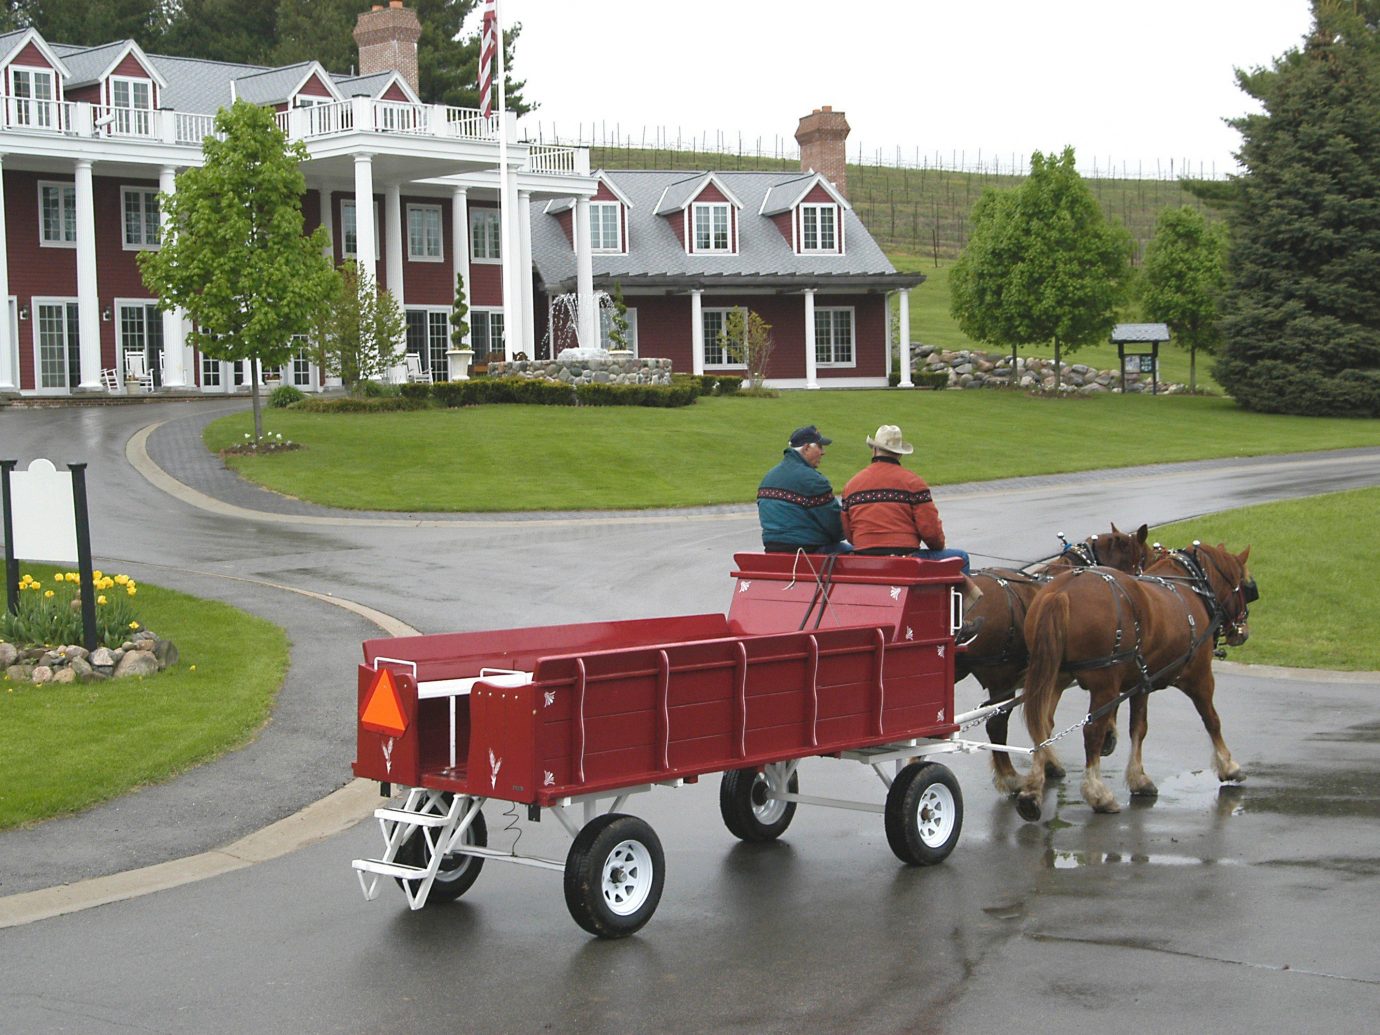 Hotels road outdoor grass sky pulling carriage transport drawn horse and buggy vehicle street red cart horse like mammal Farm horse-drawn vehicle pulled